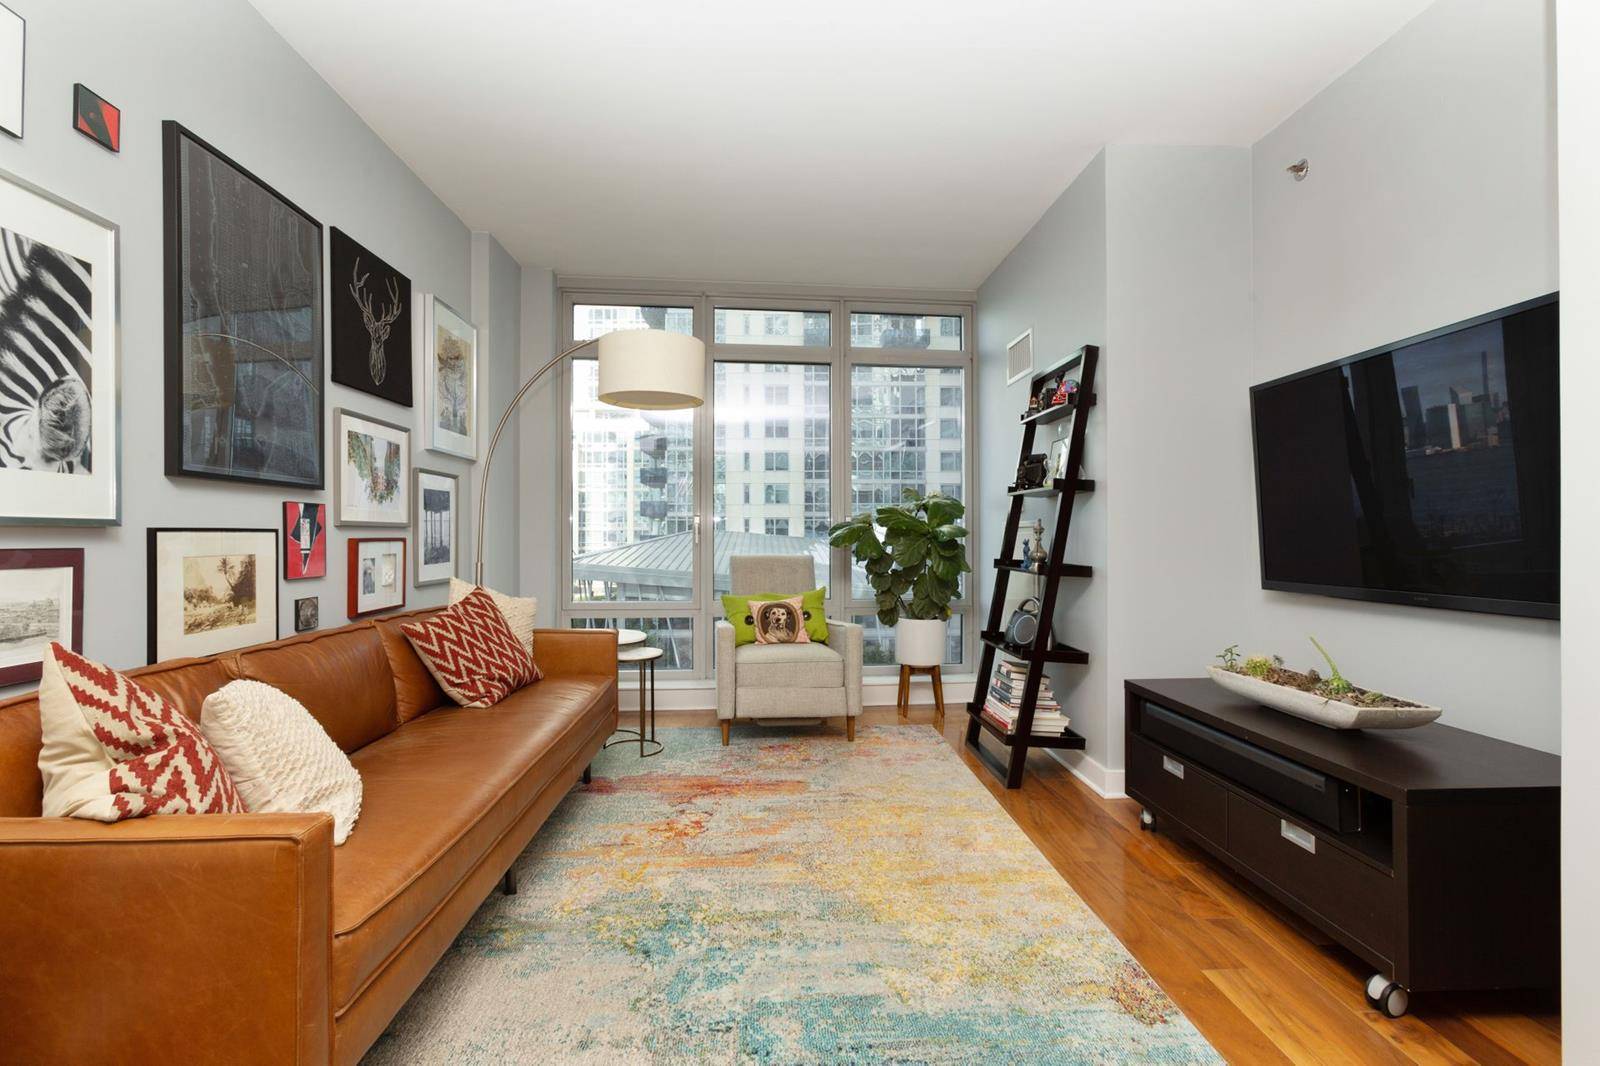 Back on the market ! Almost 1, 000 square feet that includes a home office and guest bathroom awaits on the edge of the East River.